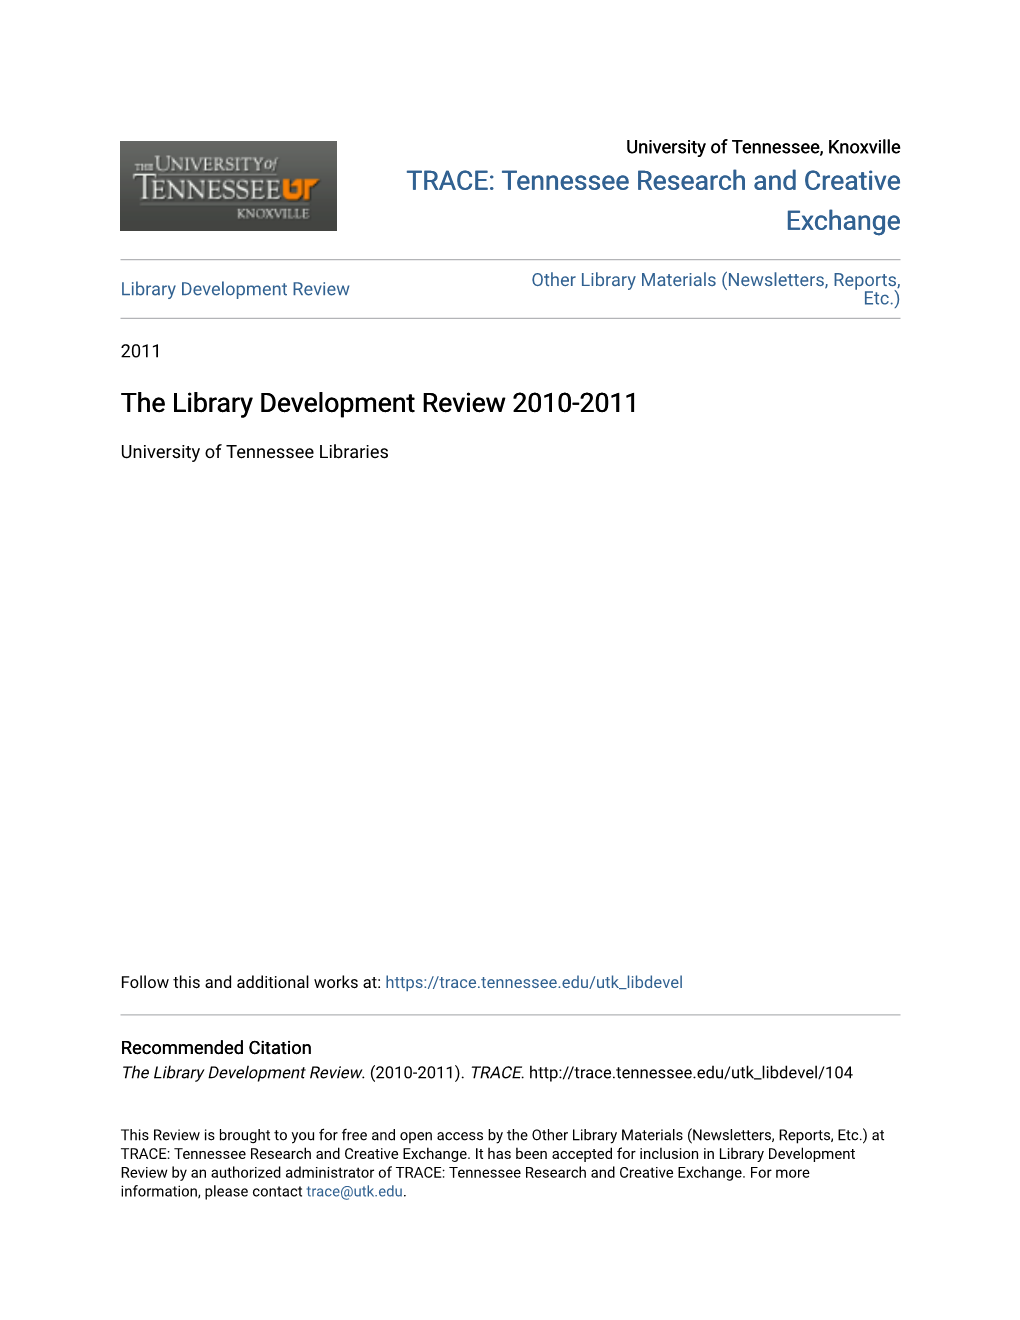 The Library Development Review 2010-2011